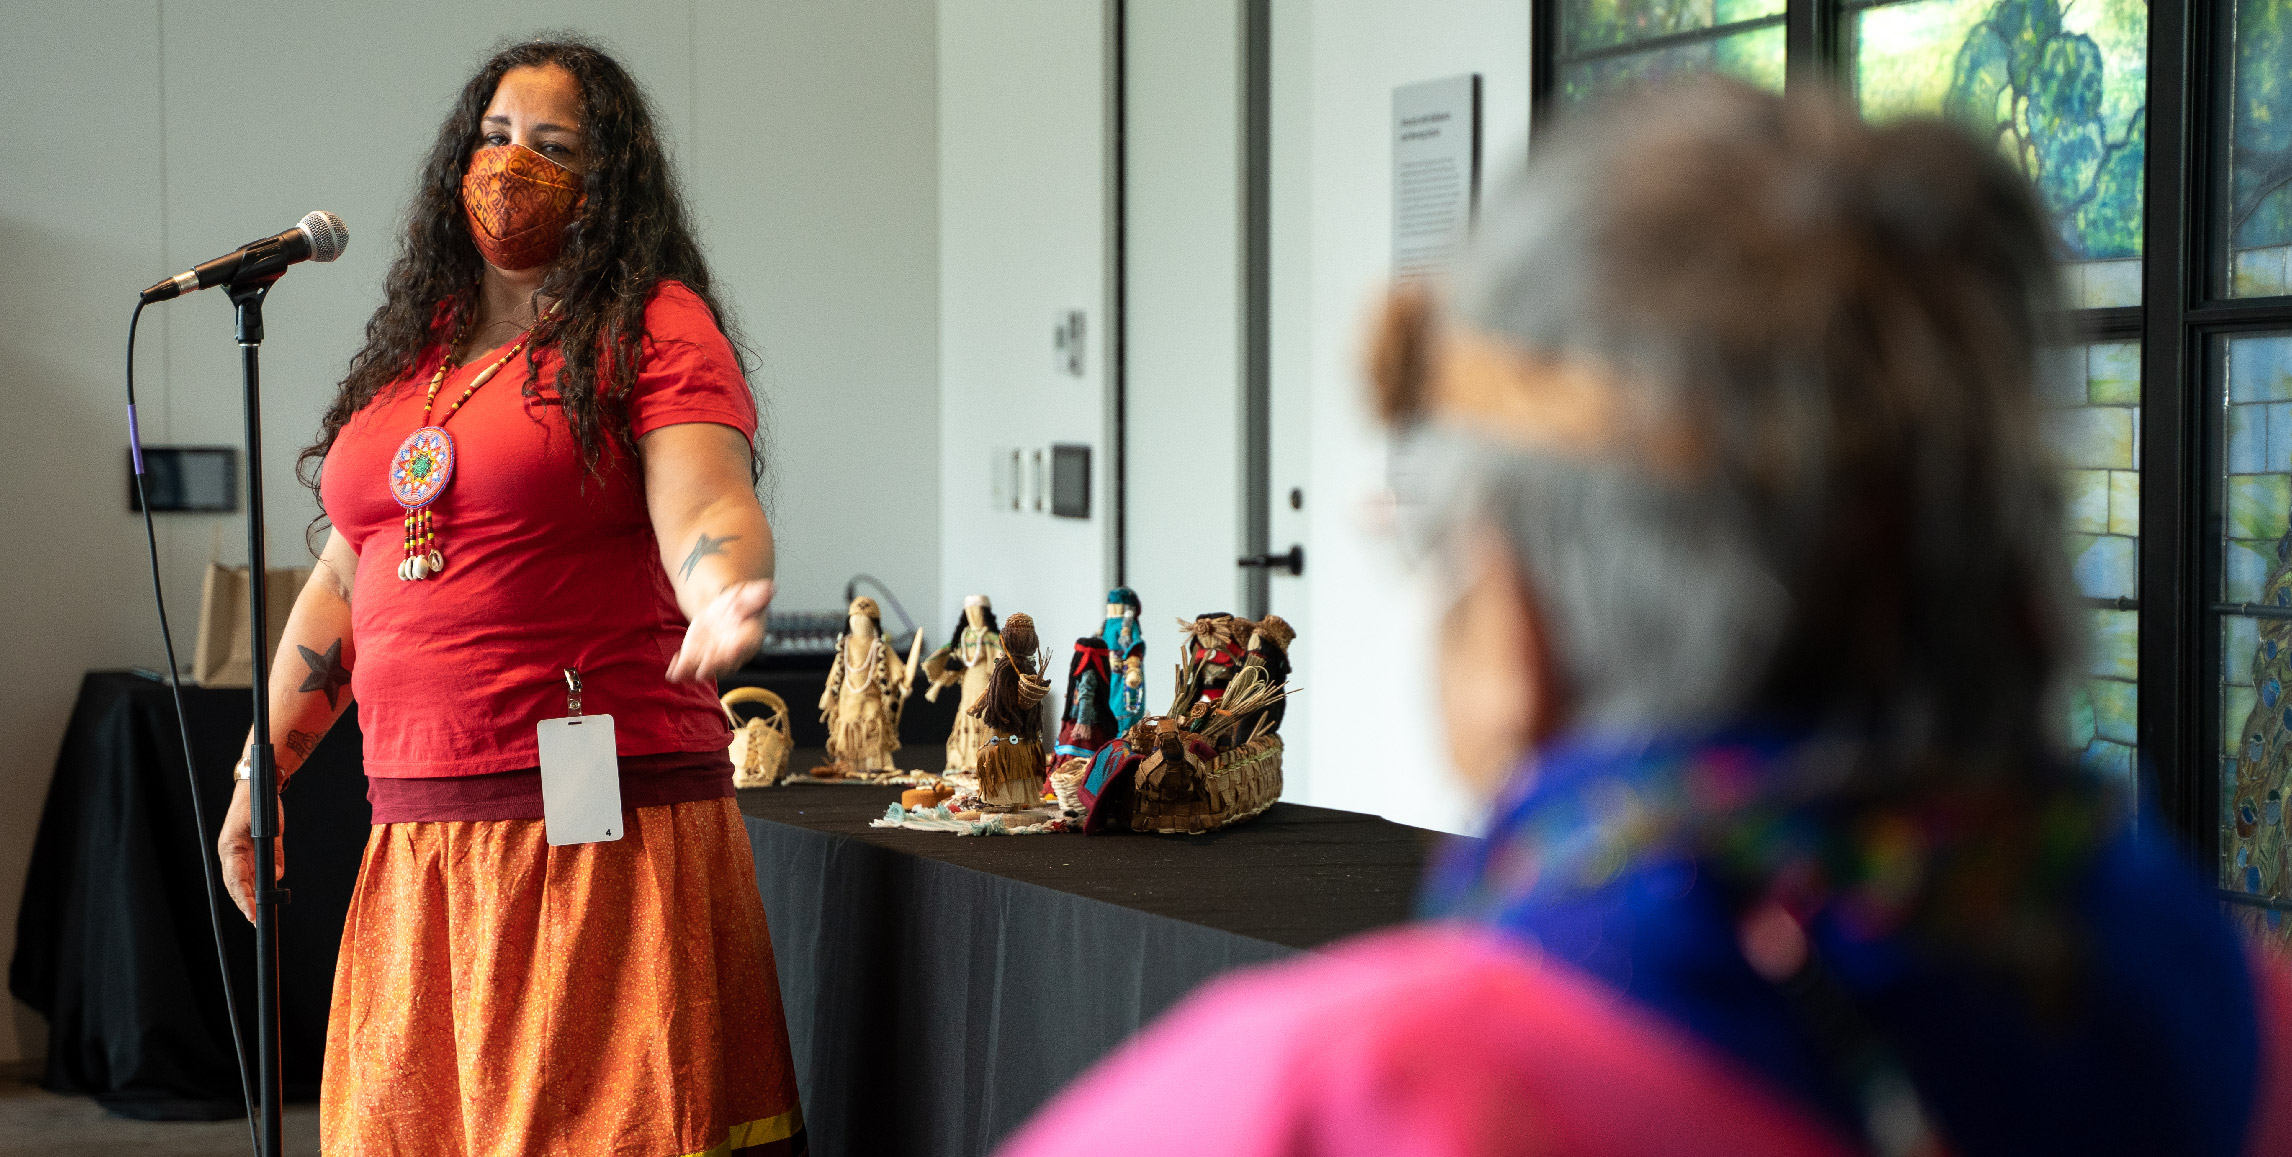 D’Ana Valenzuela shares her experience and gratitude from working with Celeste Whitewolf and the Núun ken’witnéewit artist family.